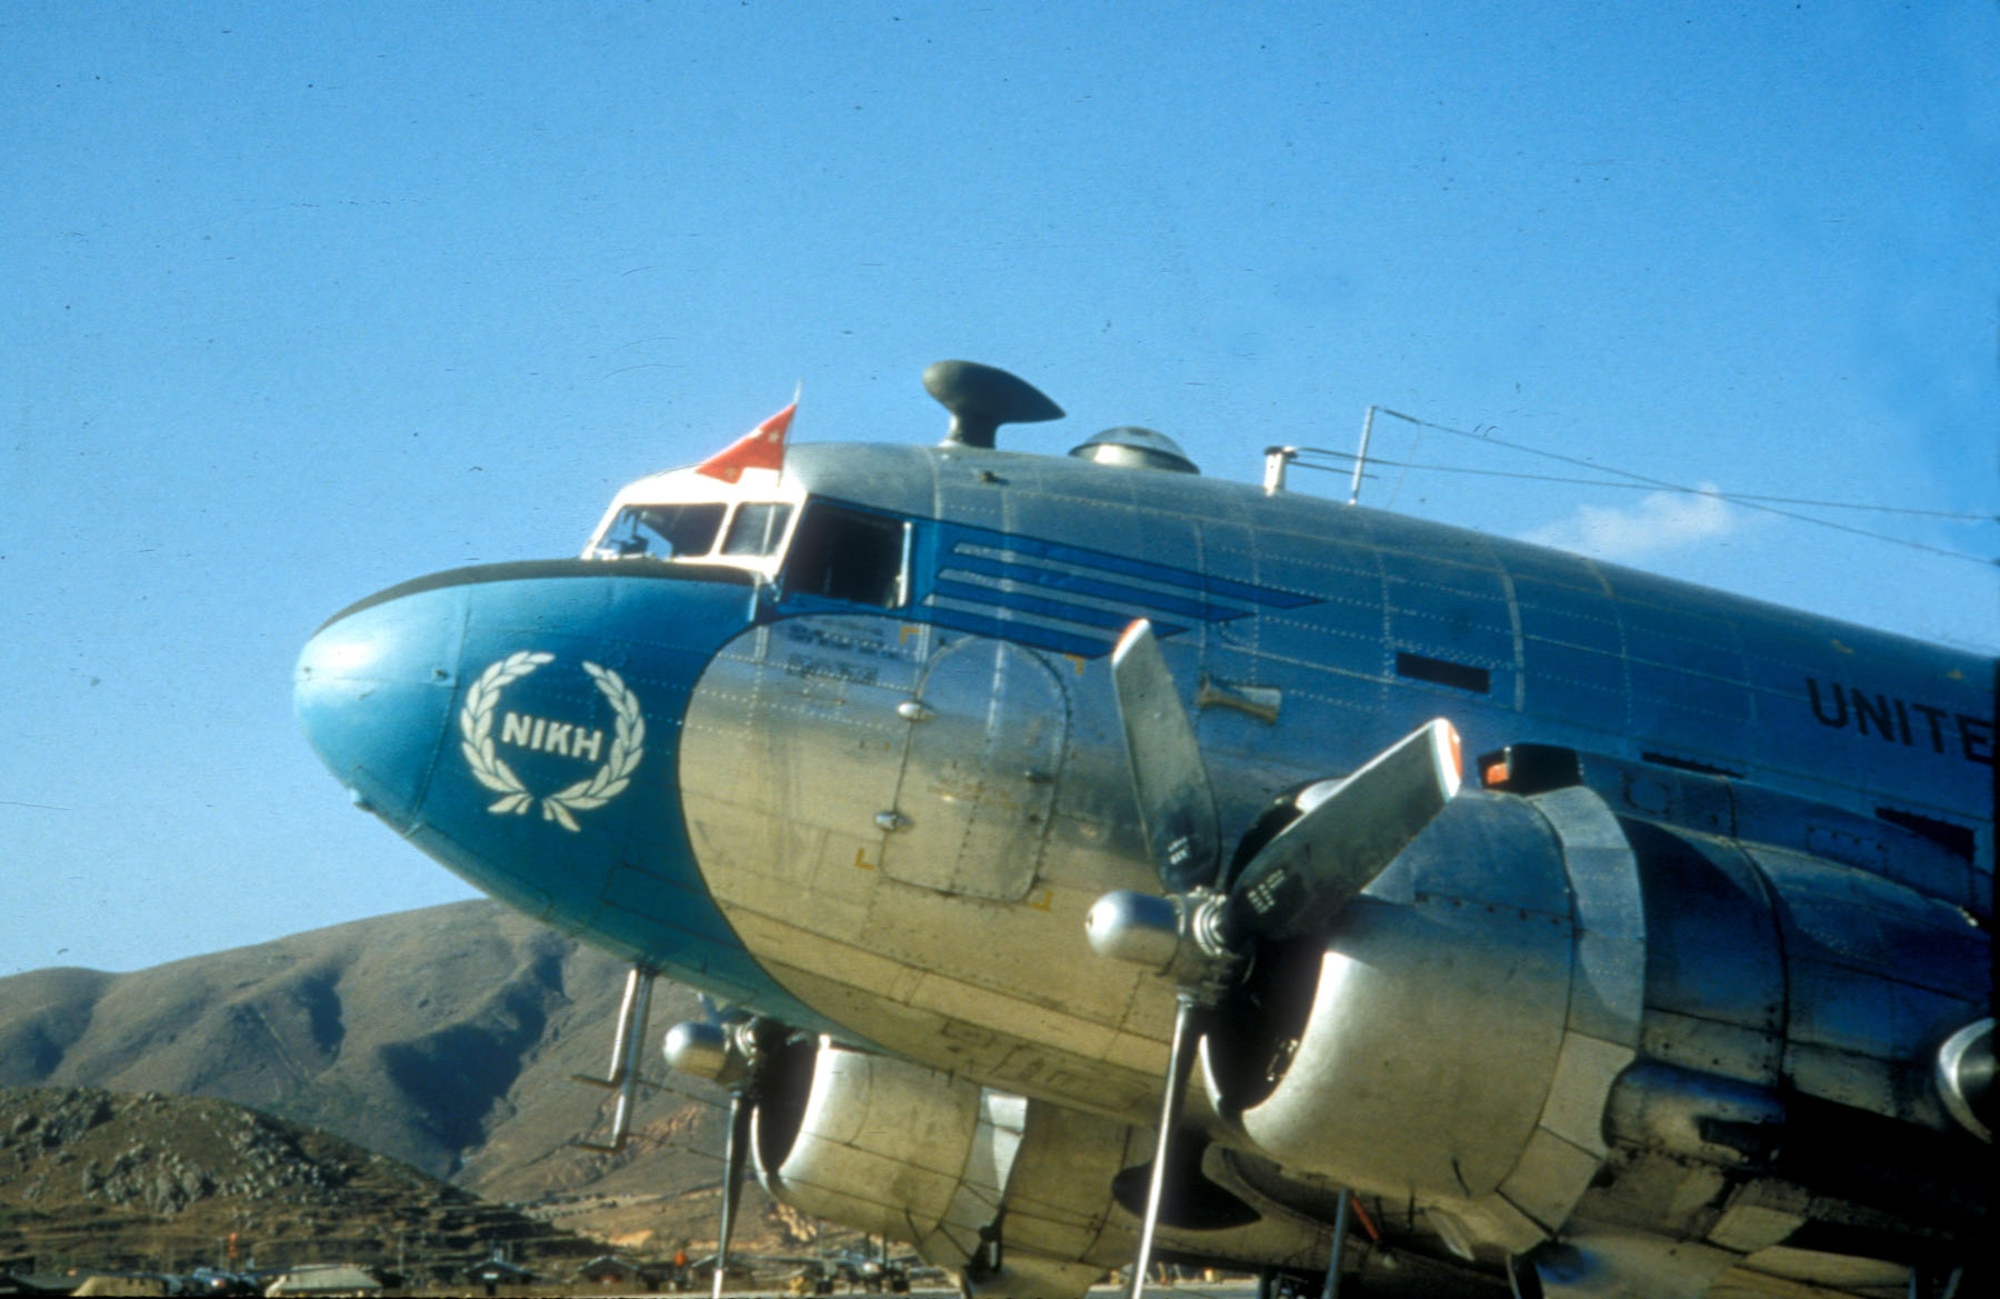 Nose of Gen. James Van Fleet's VC-47D, painted in UN blue. “NIKH” is the Greek word for victory. (U.S. Air Force photo)